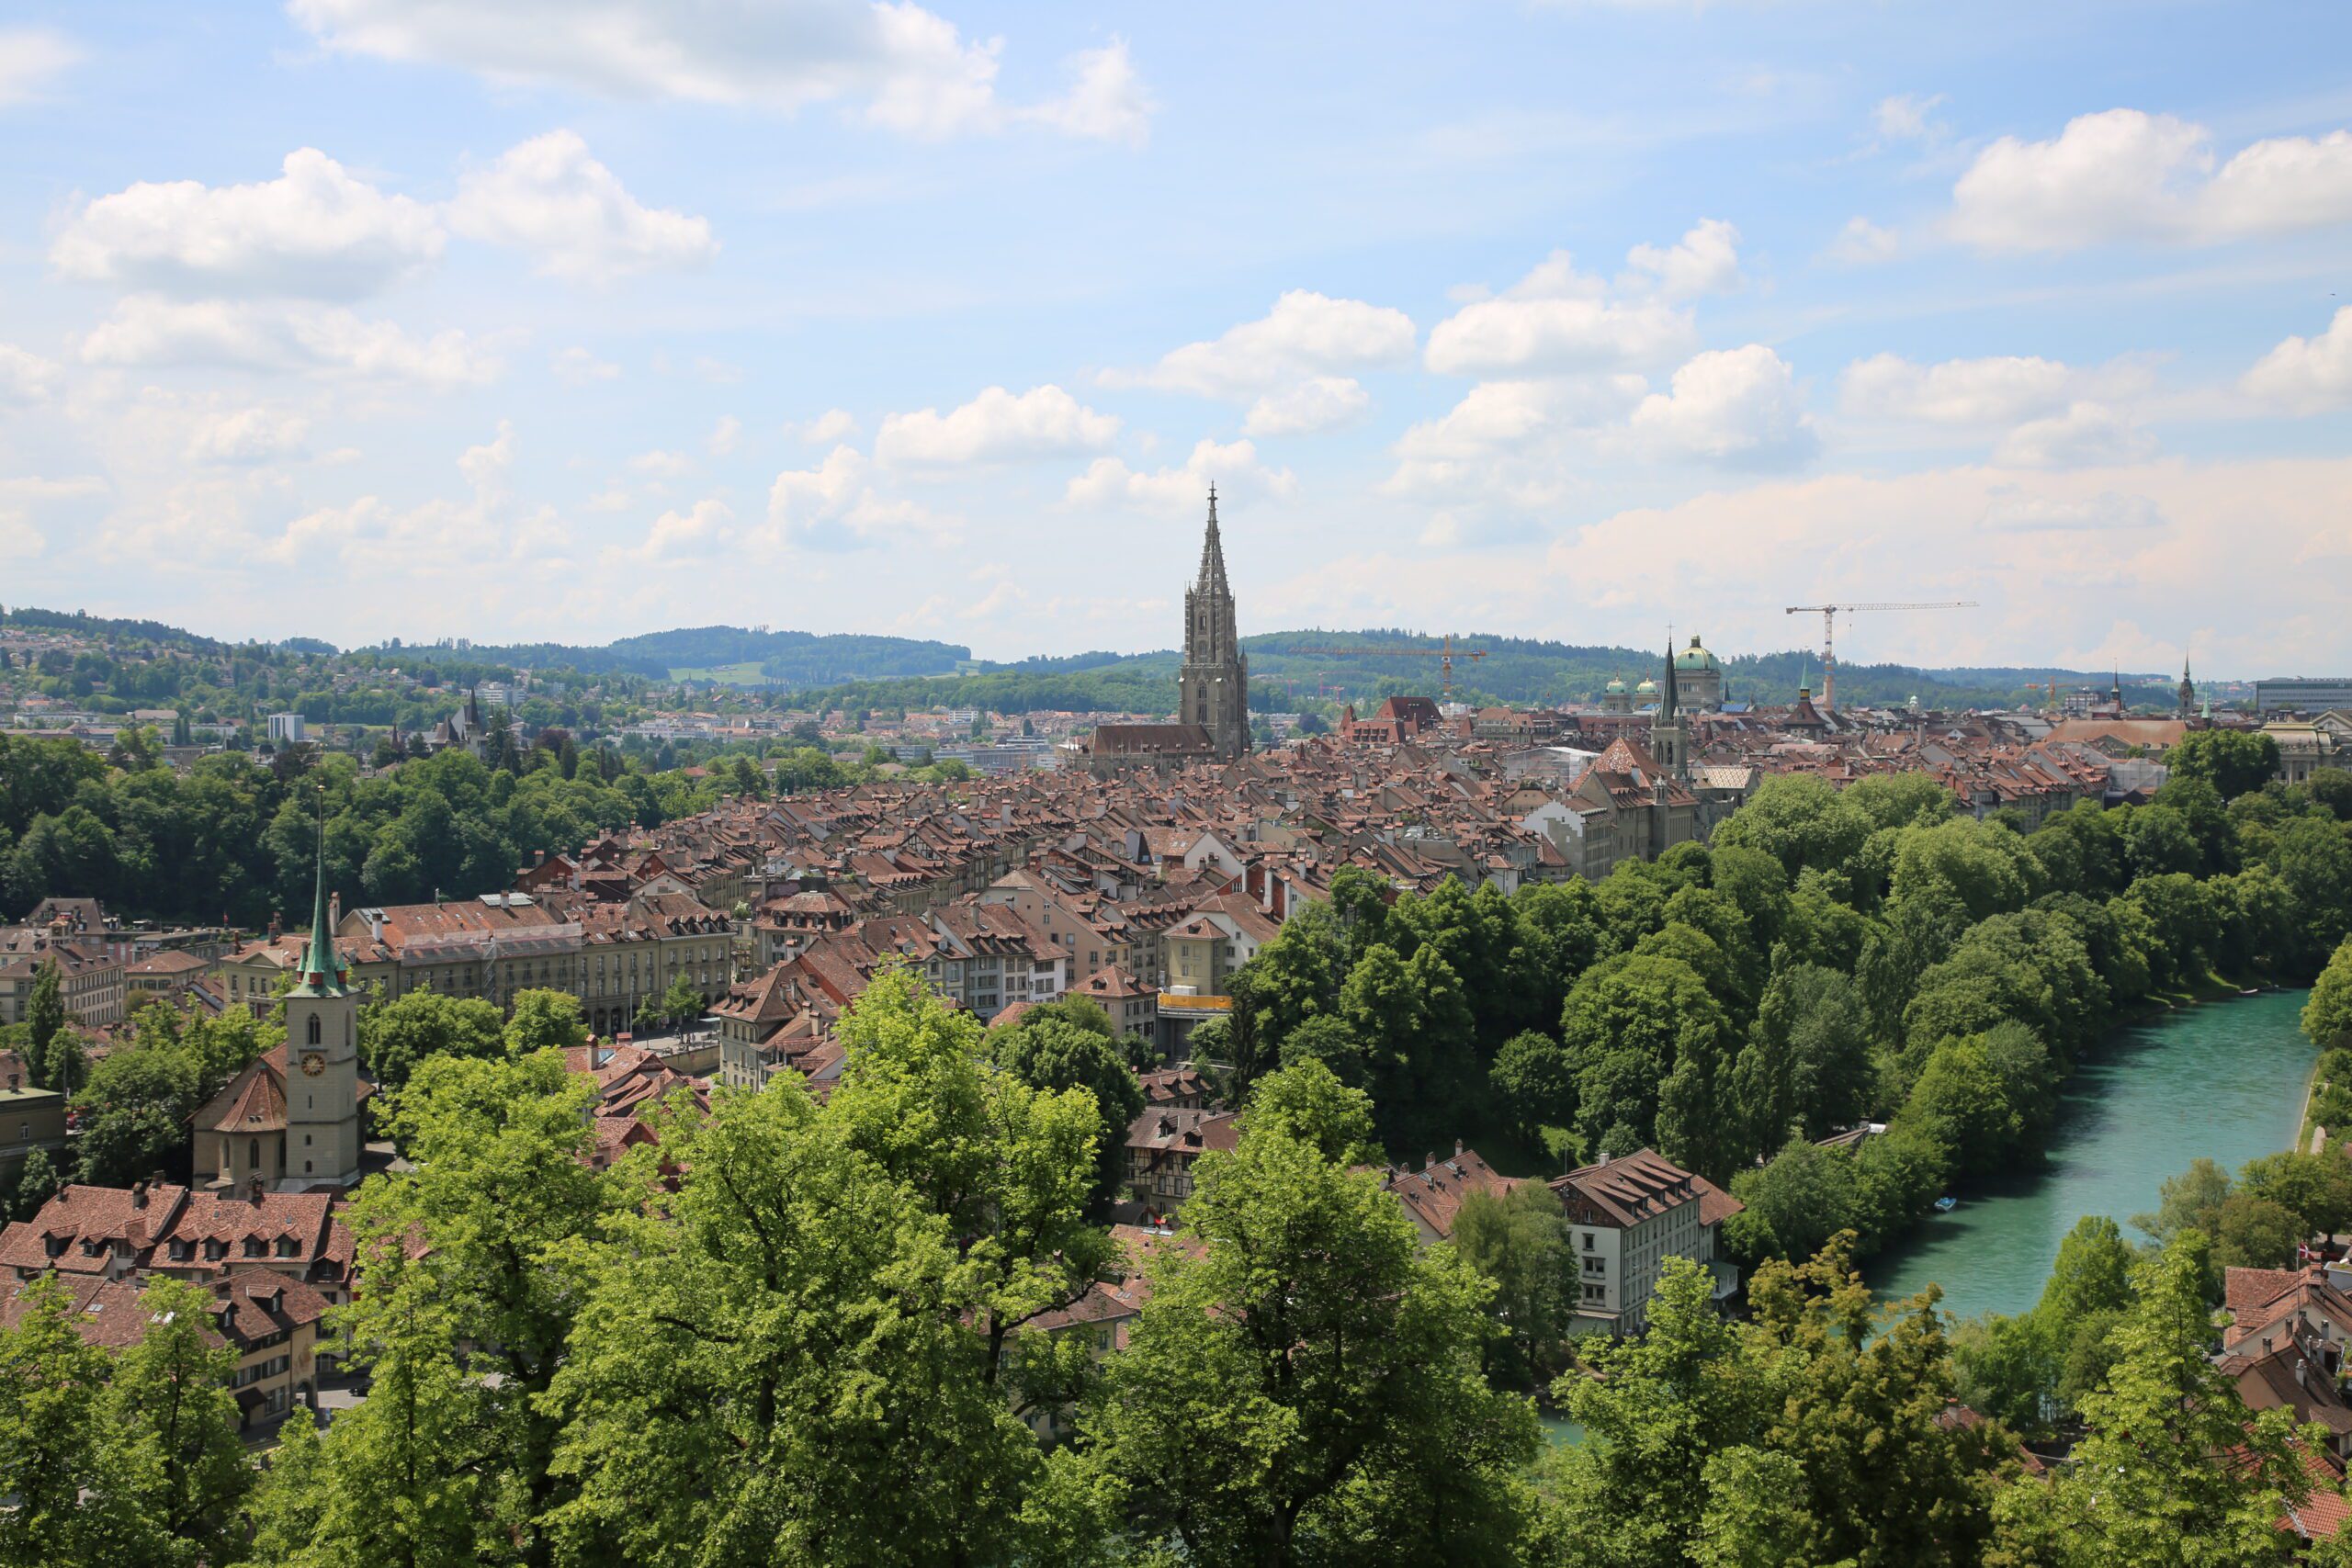 The city of Bern from a hill, exploring Switzerland, its Hidden Trails & Majestic Peaks Tour.